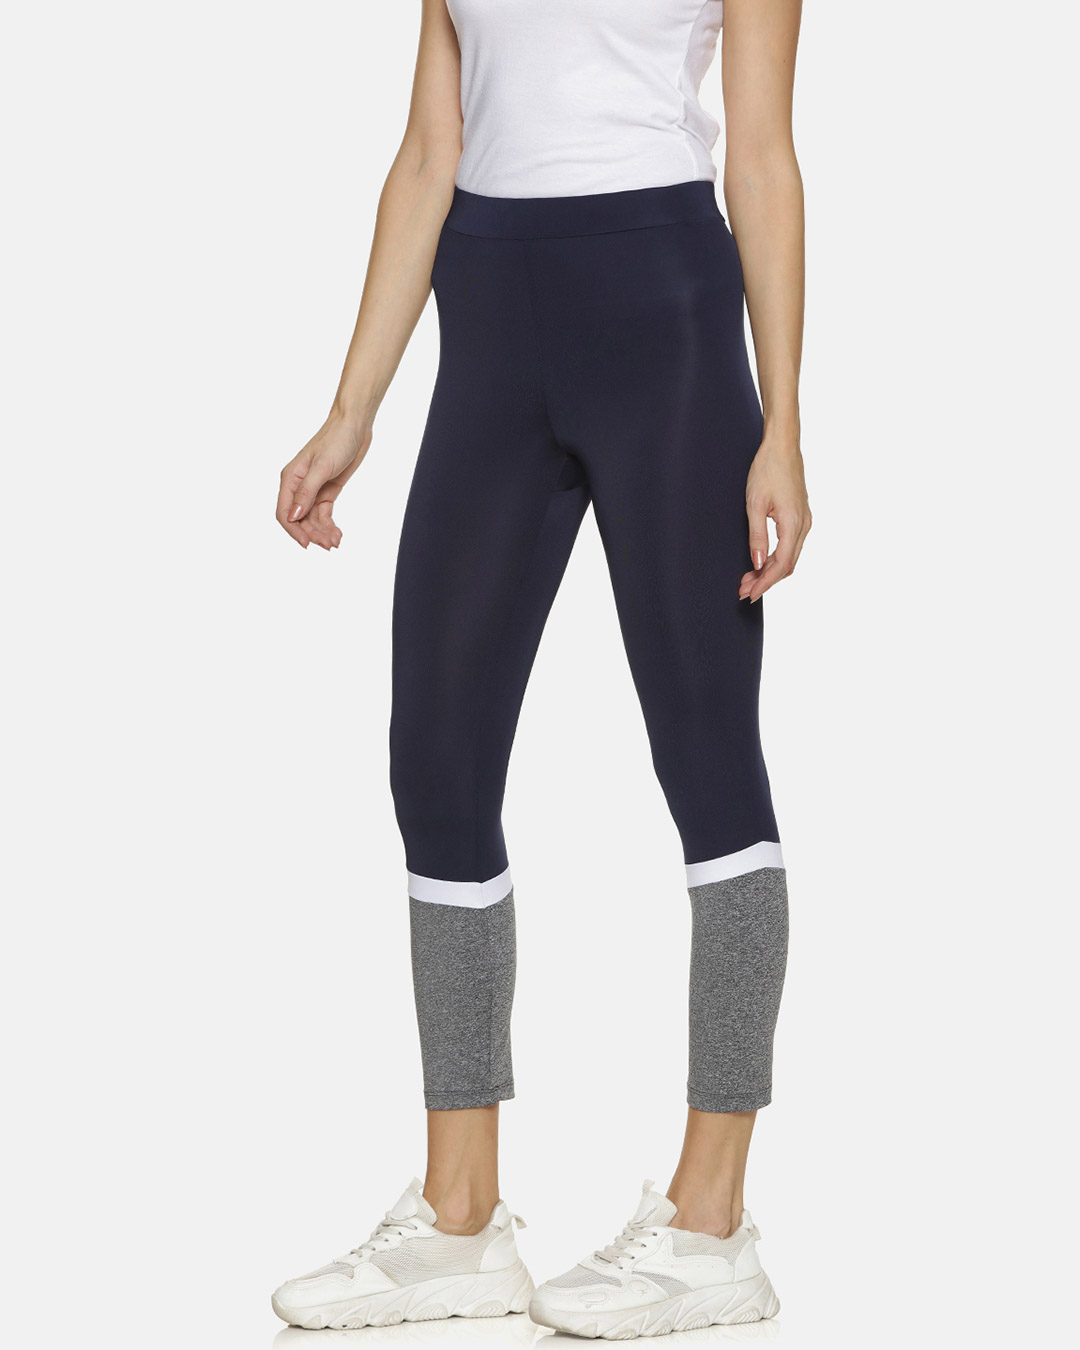 Shop Women Stylish Sports Dry Fit Tights-Back